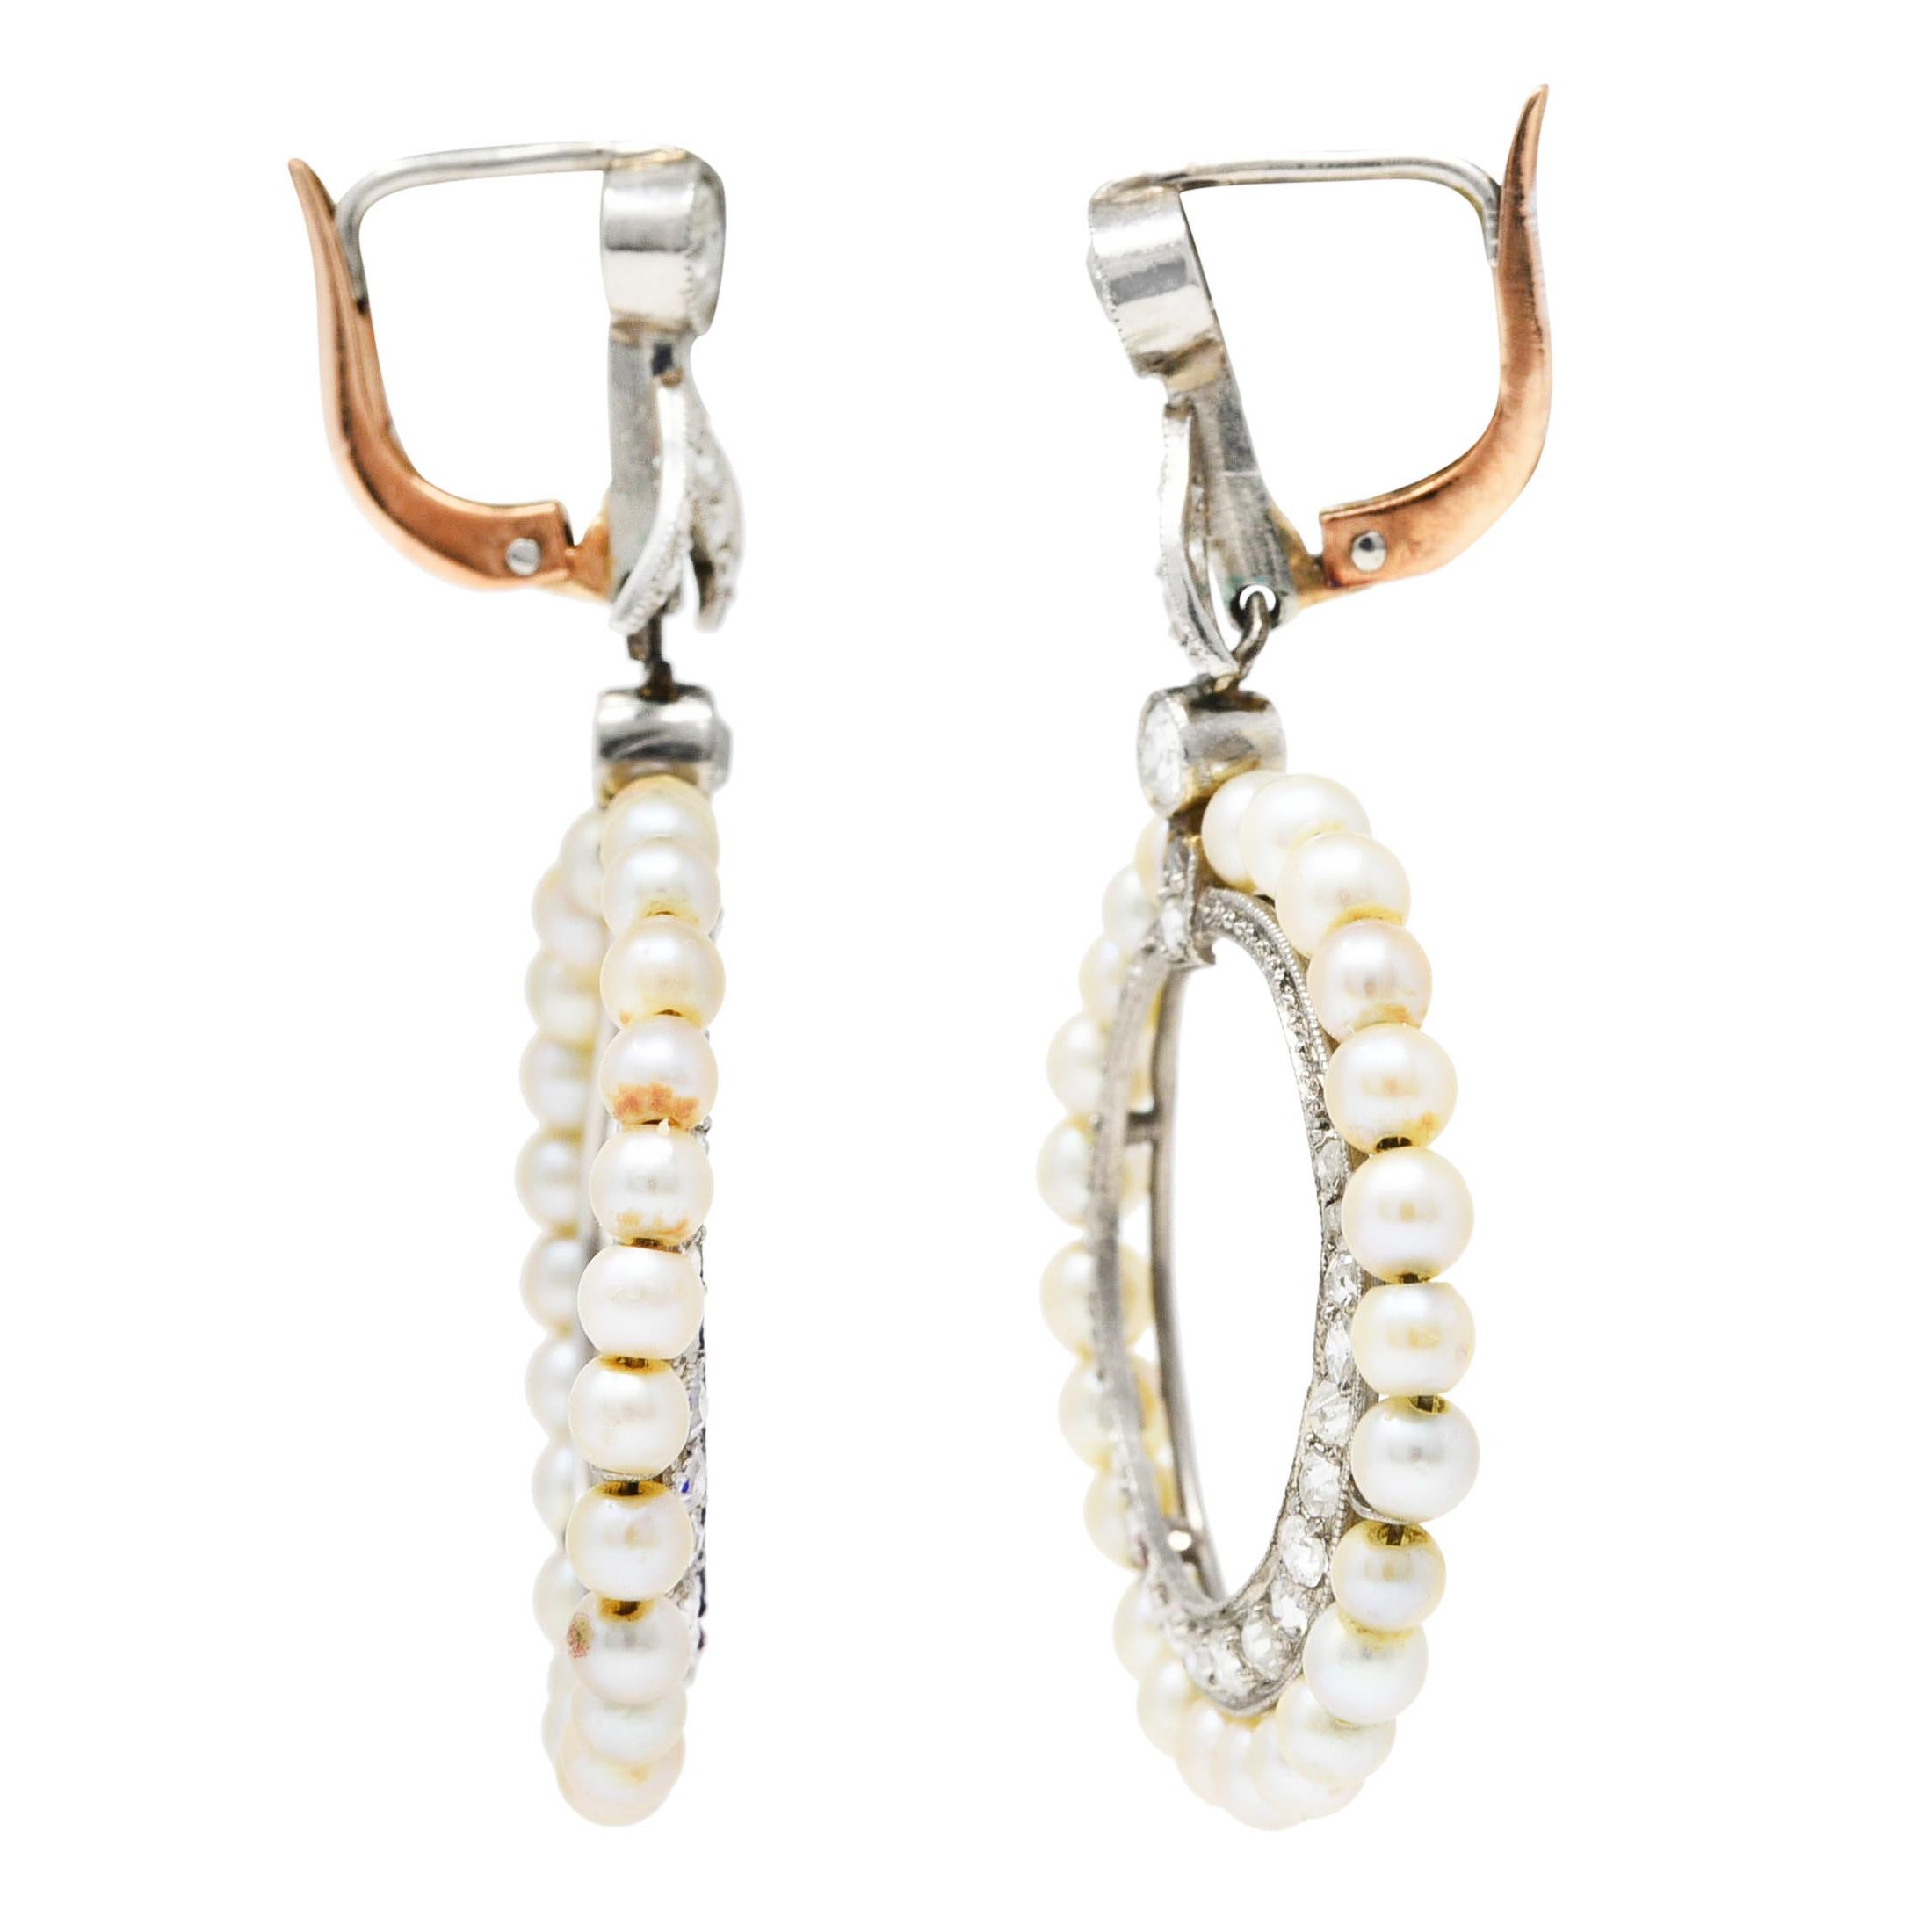 Earrings are designed as diamond foliate surmounts suspending an articulated drop. Drop is two concentric circles with an inner diamond halo surrounded by a halo of strung 3.0 mm pearls. Pearls are well matched in cream body color with good to very